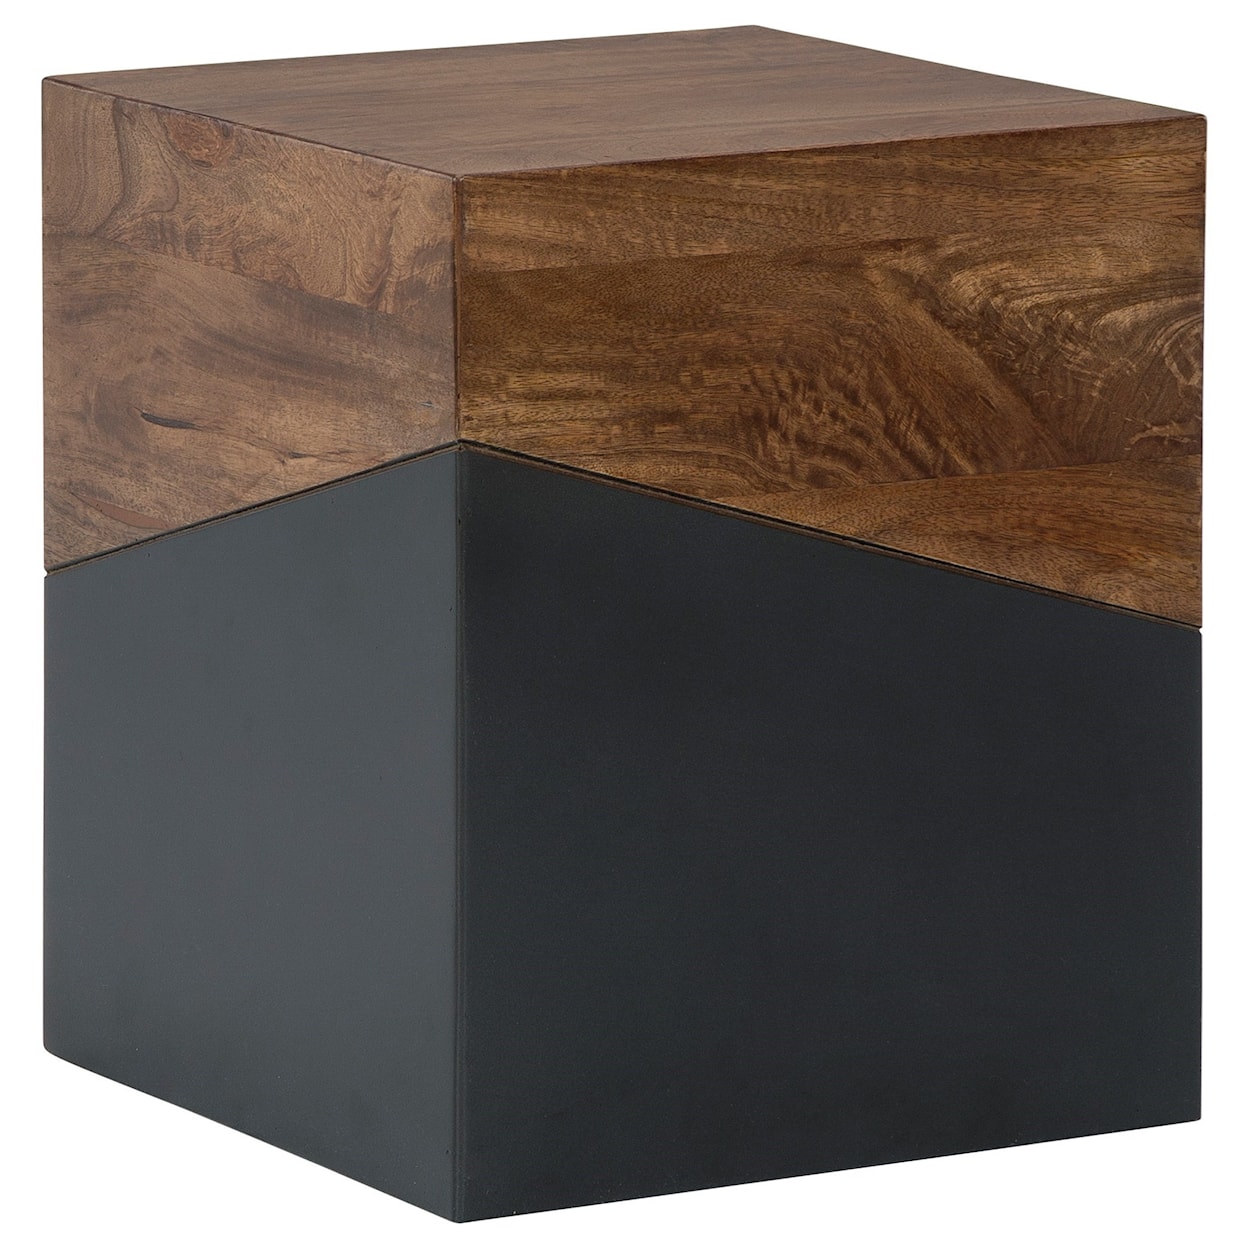 Signature Design by Ashley Furniture Trailbend Accent Table